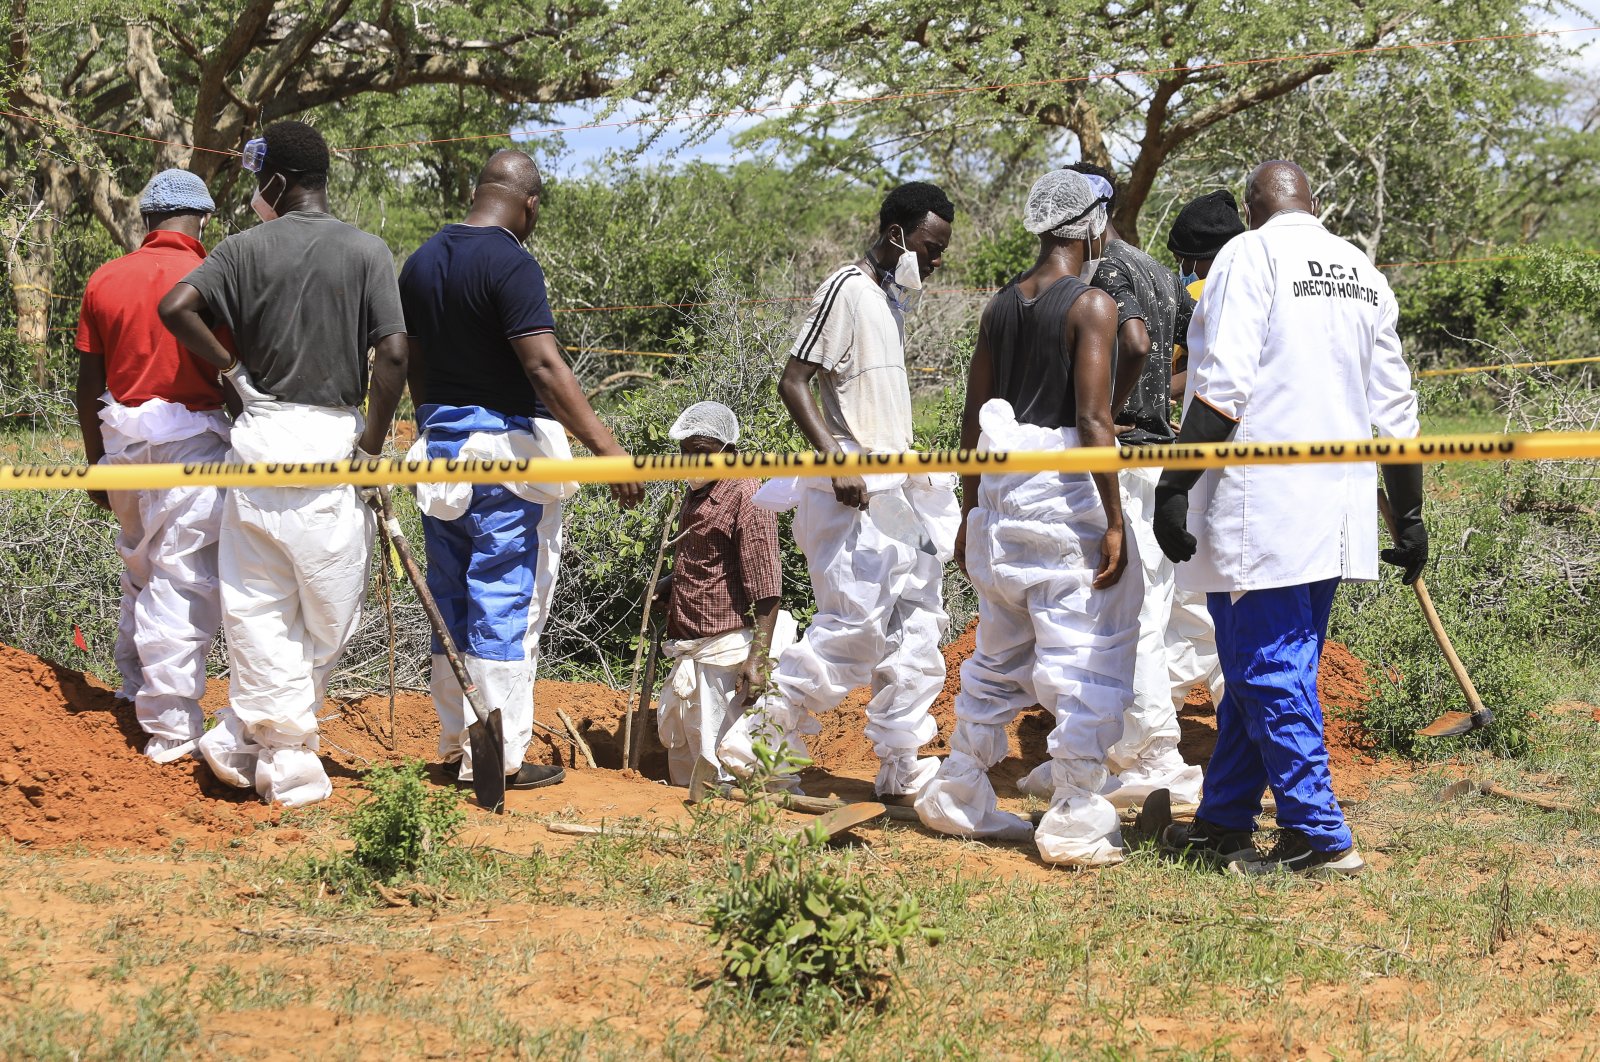 Kenyan homicide detectives and forensic experts examine exhumed bodies from several shallow mass graves in Kilifi, Kenya, April 23, 2023. (EPA Photo)